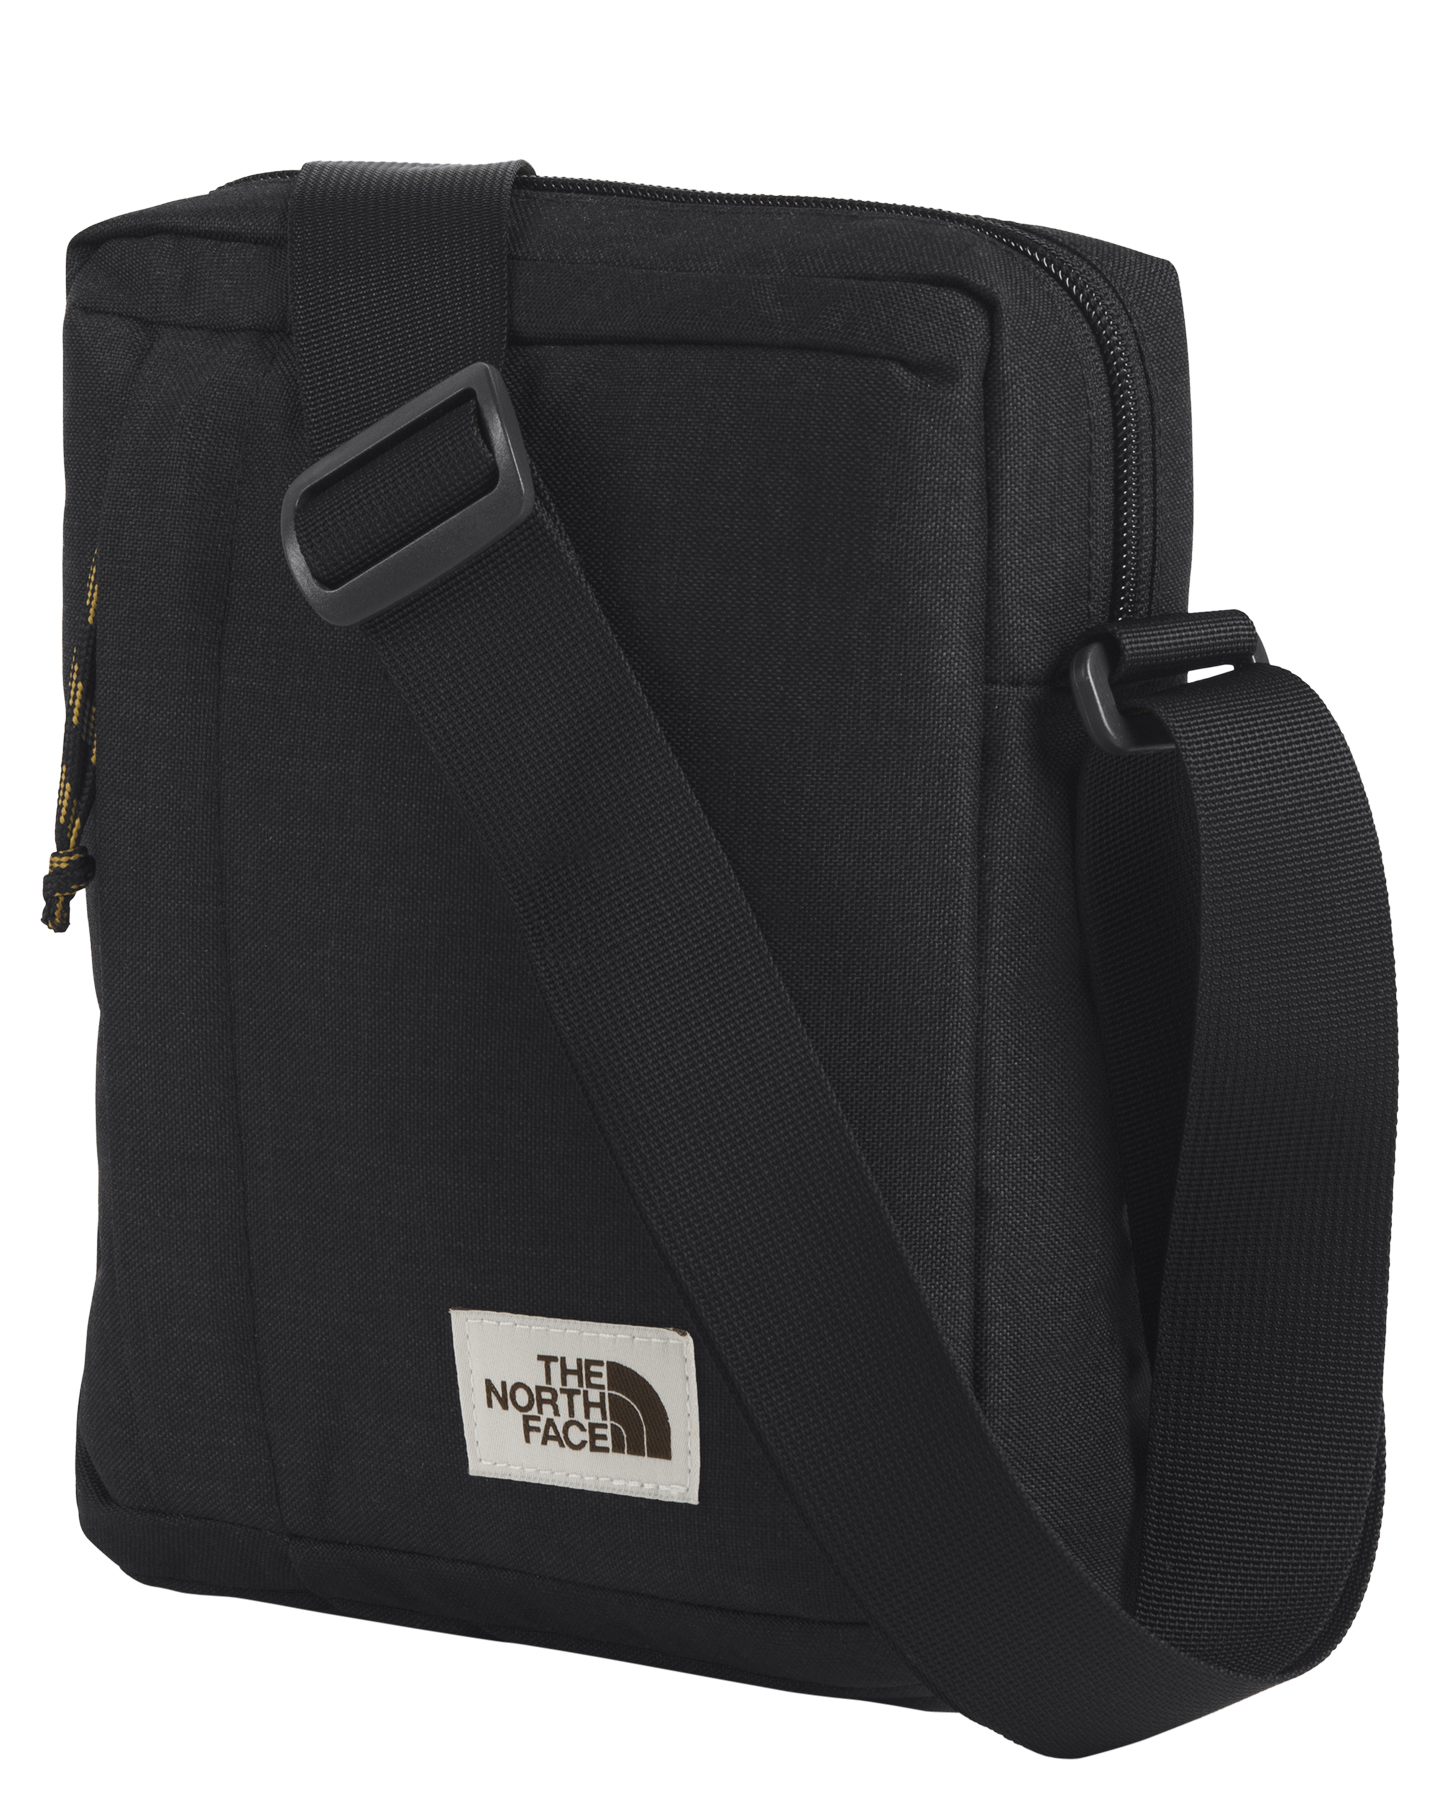 The North Face Cross Body Bag - Tnf Black | SurfStitch